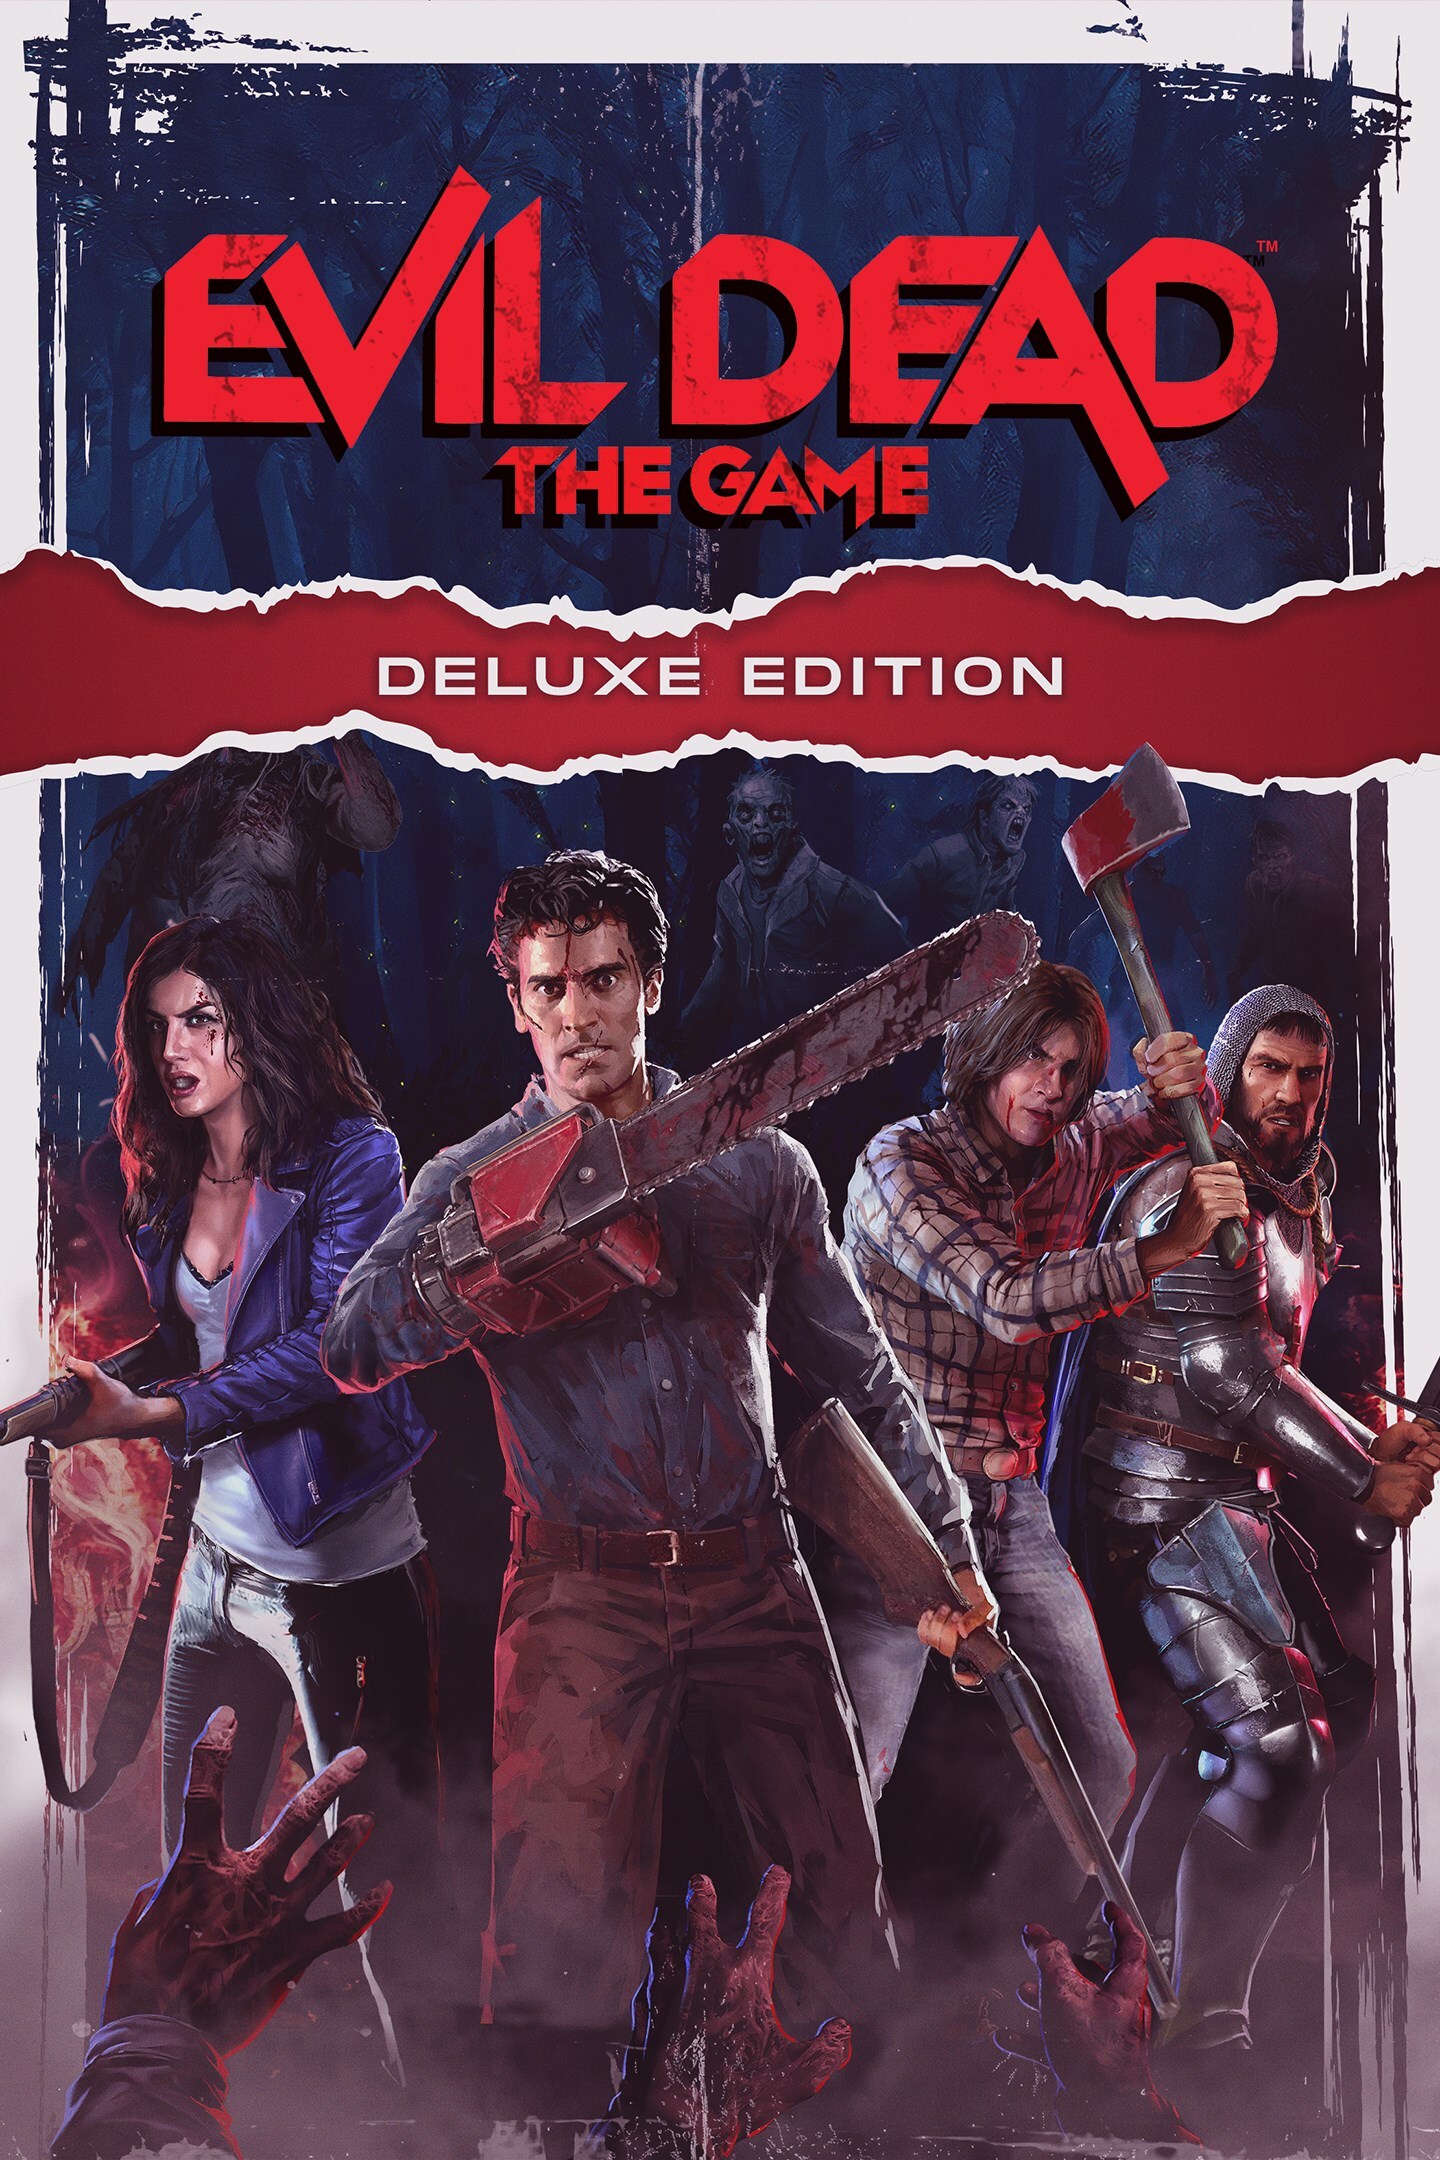 Evil Dead: The Game, PlayStation 4 